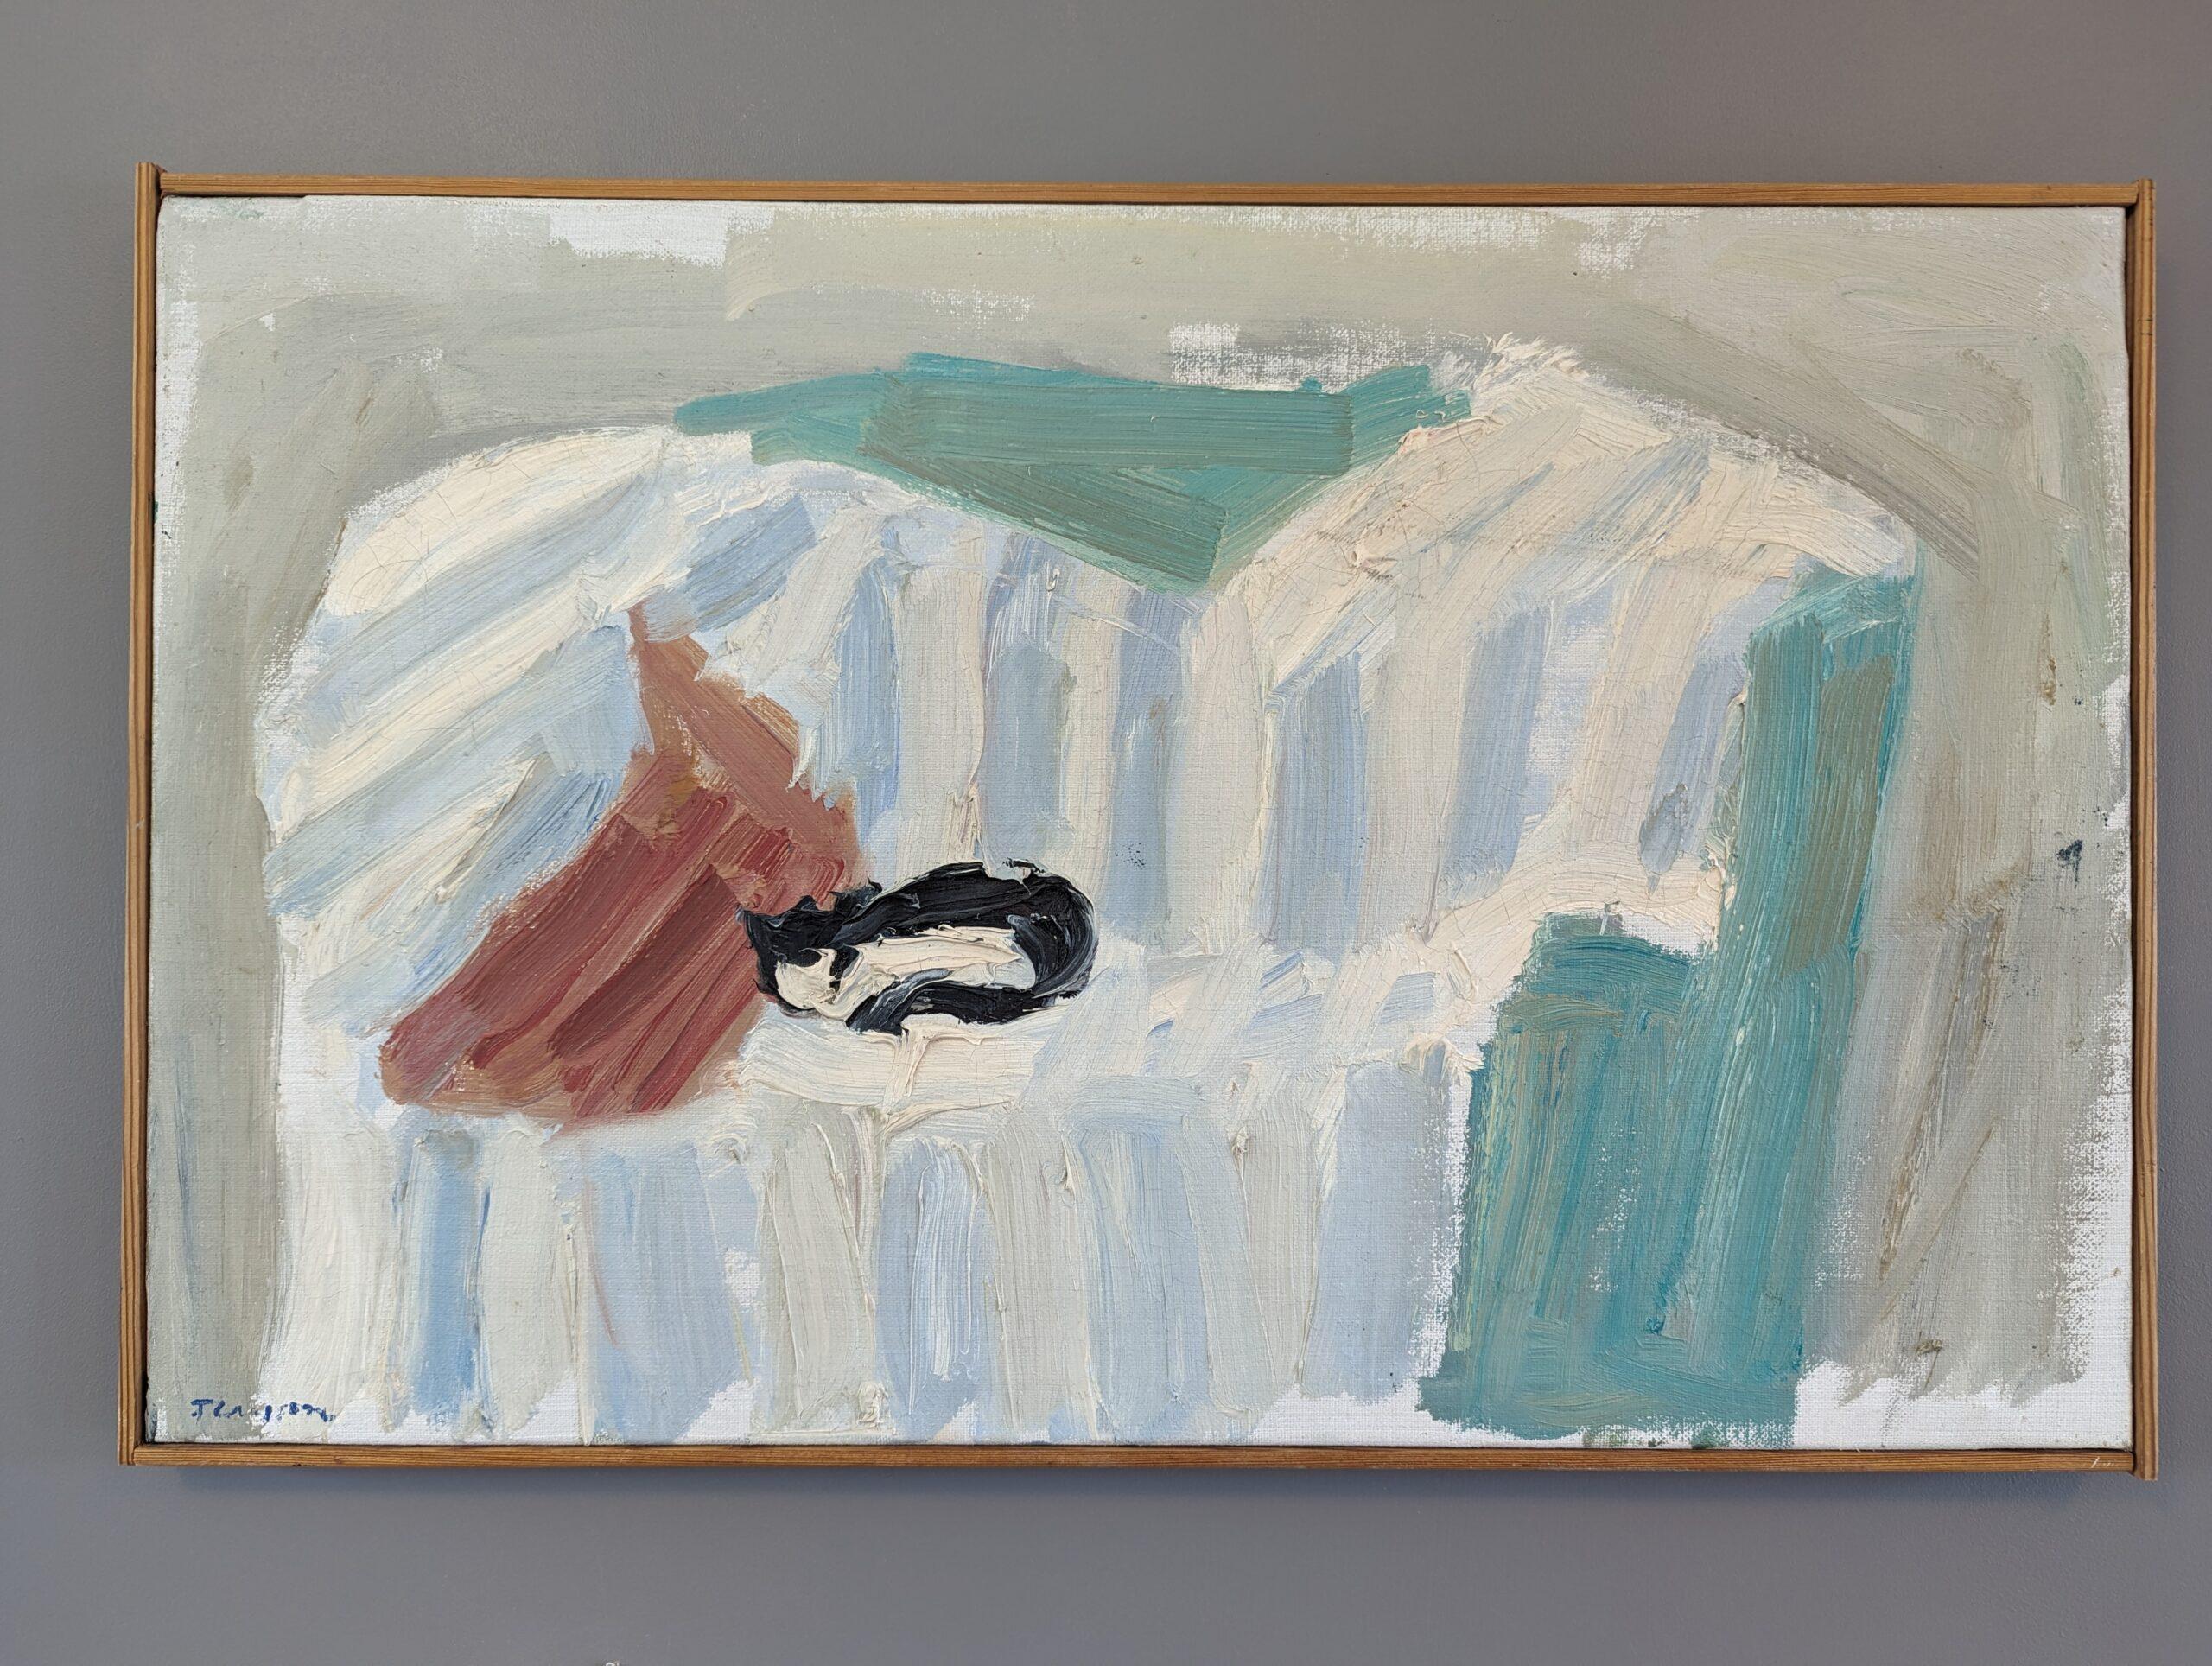 CAT ON COUCH
Size: 40 x 63 cm (including frame)
Oil on Canvas

A delightful and very cleverly painted composition in oil, painted onto canvas.

Simple but very effective in its composition, we see an interior scene of a cat curled up on a striped